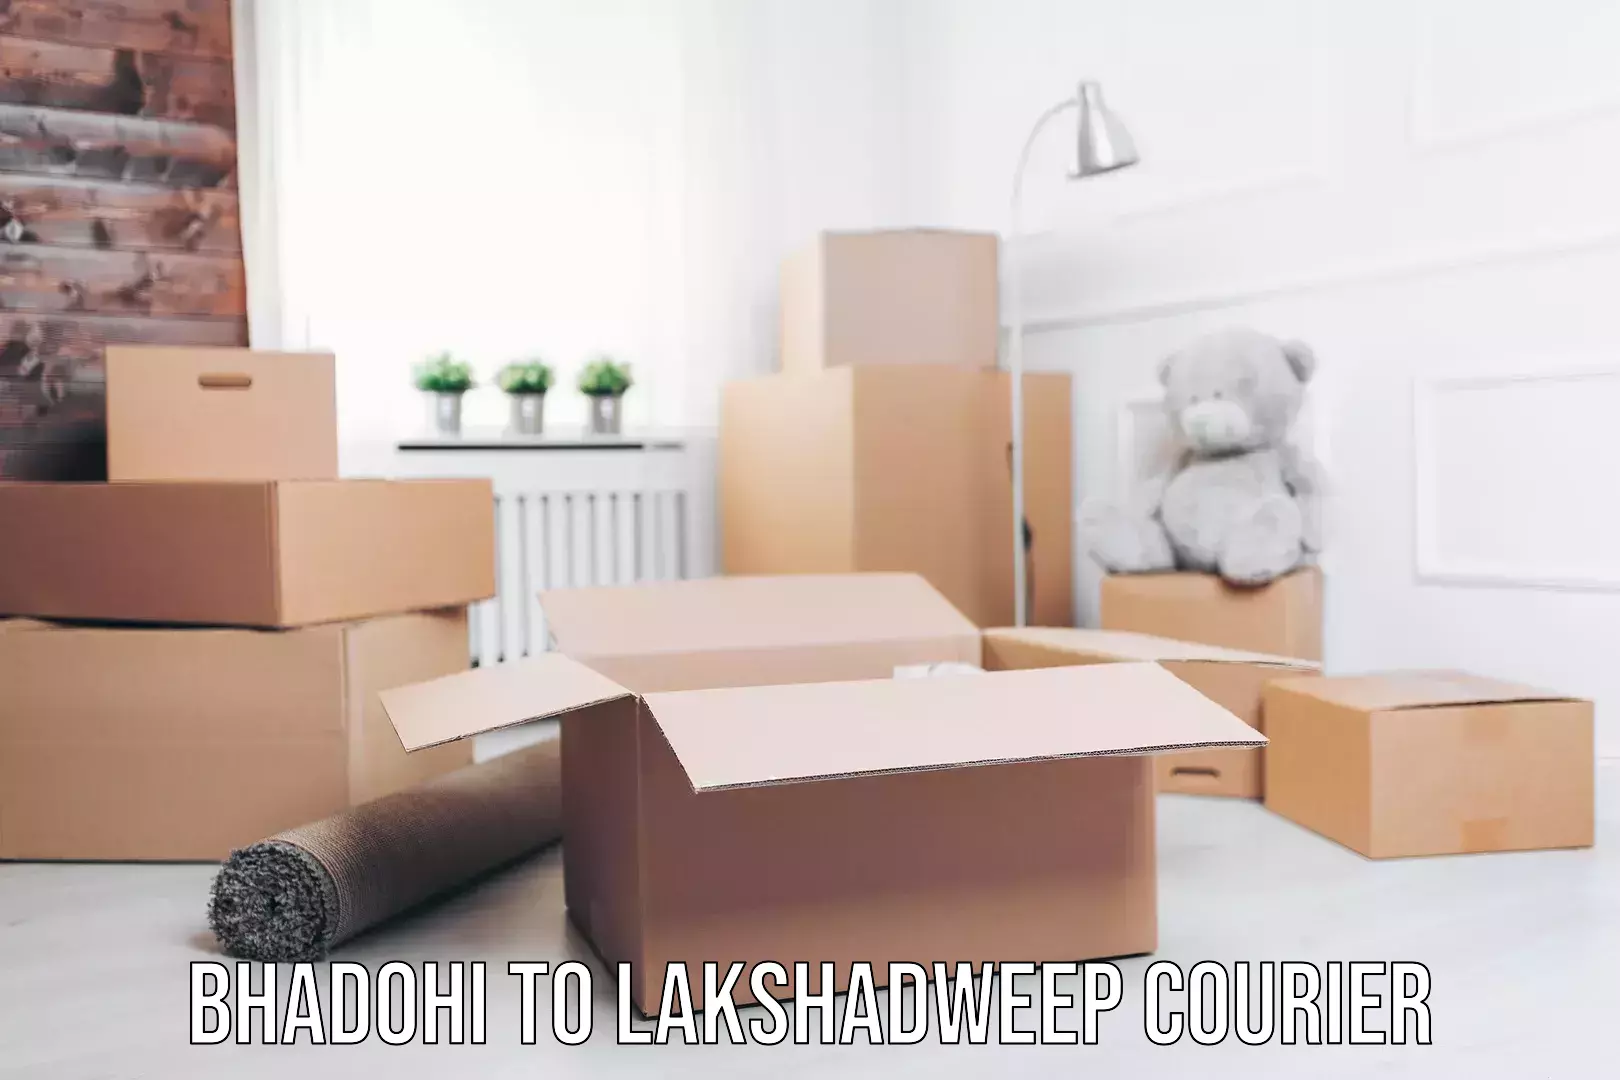 High-priority parcel service Bhadohi to Lakshadweep